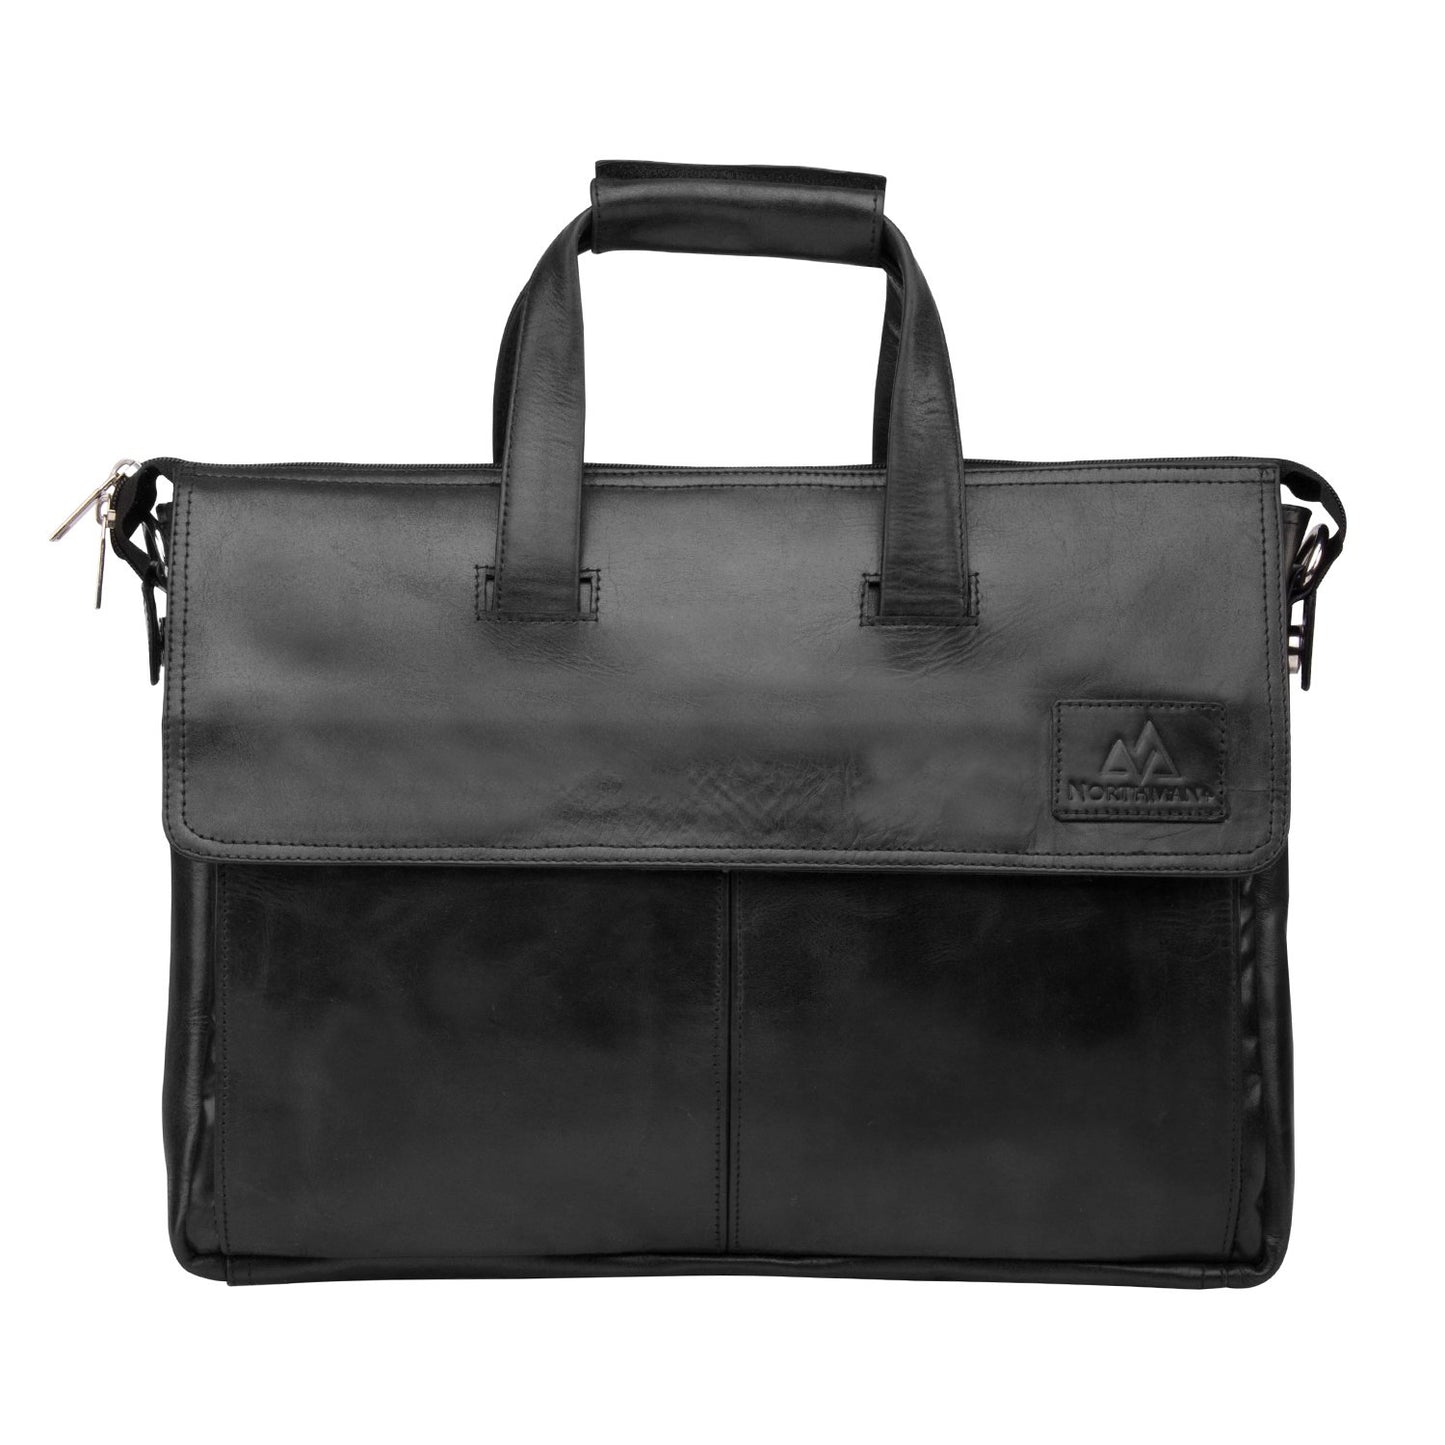 The Retro Styled Laptop Bag